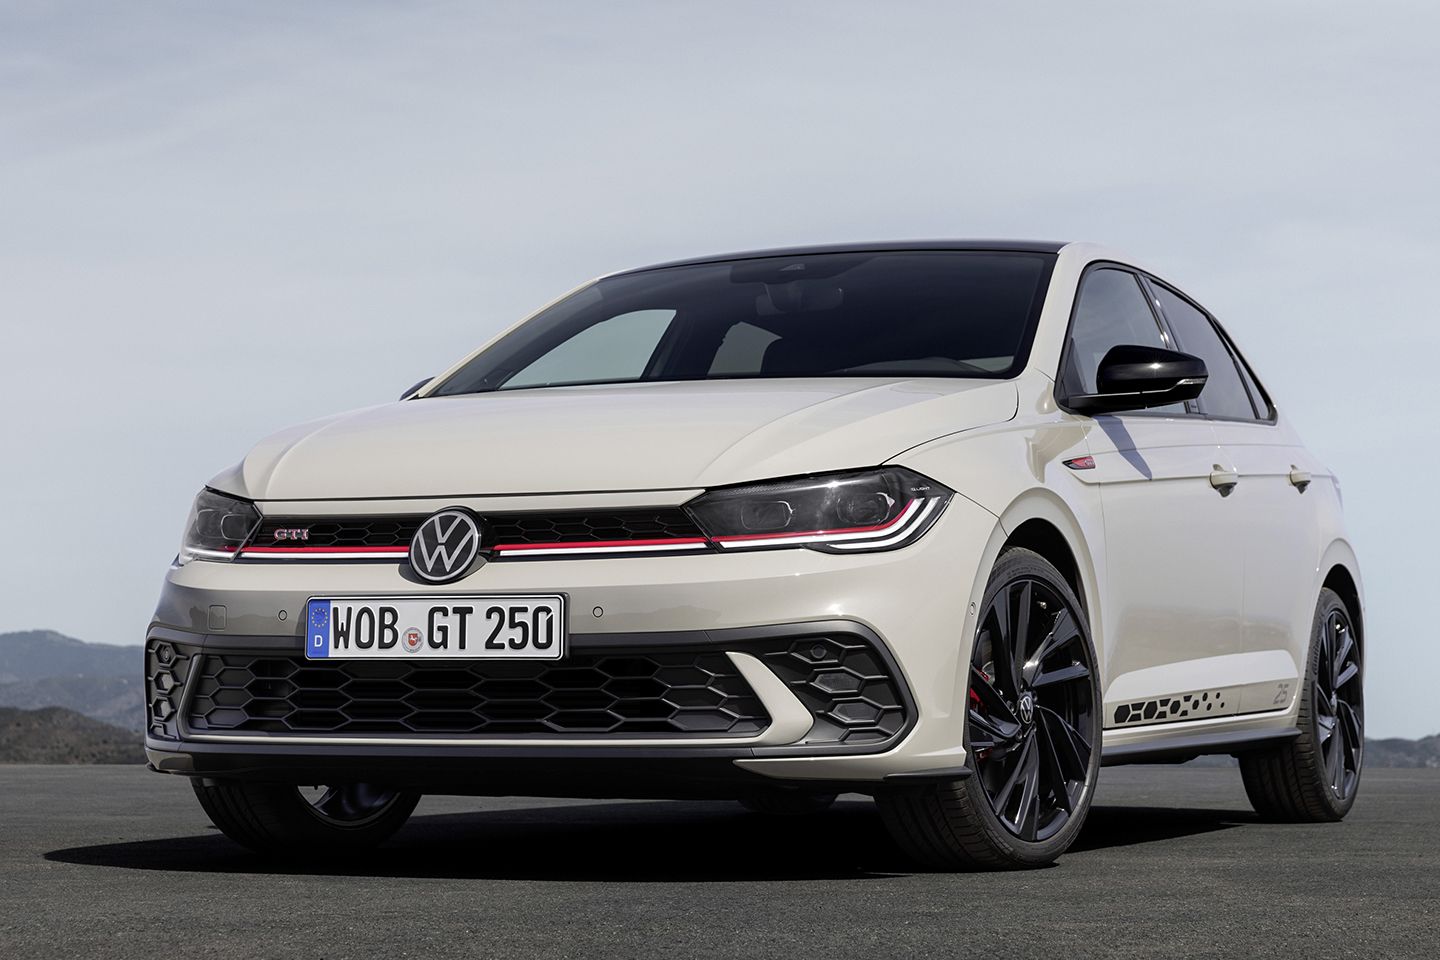 Orders open now for Polo GTI 25 - PistonHeads UK